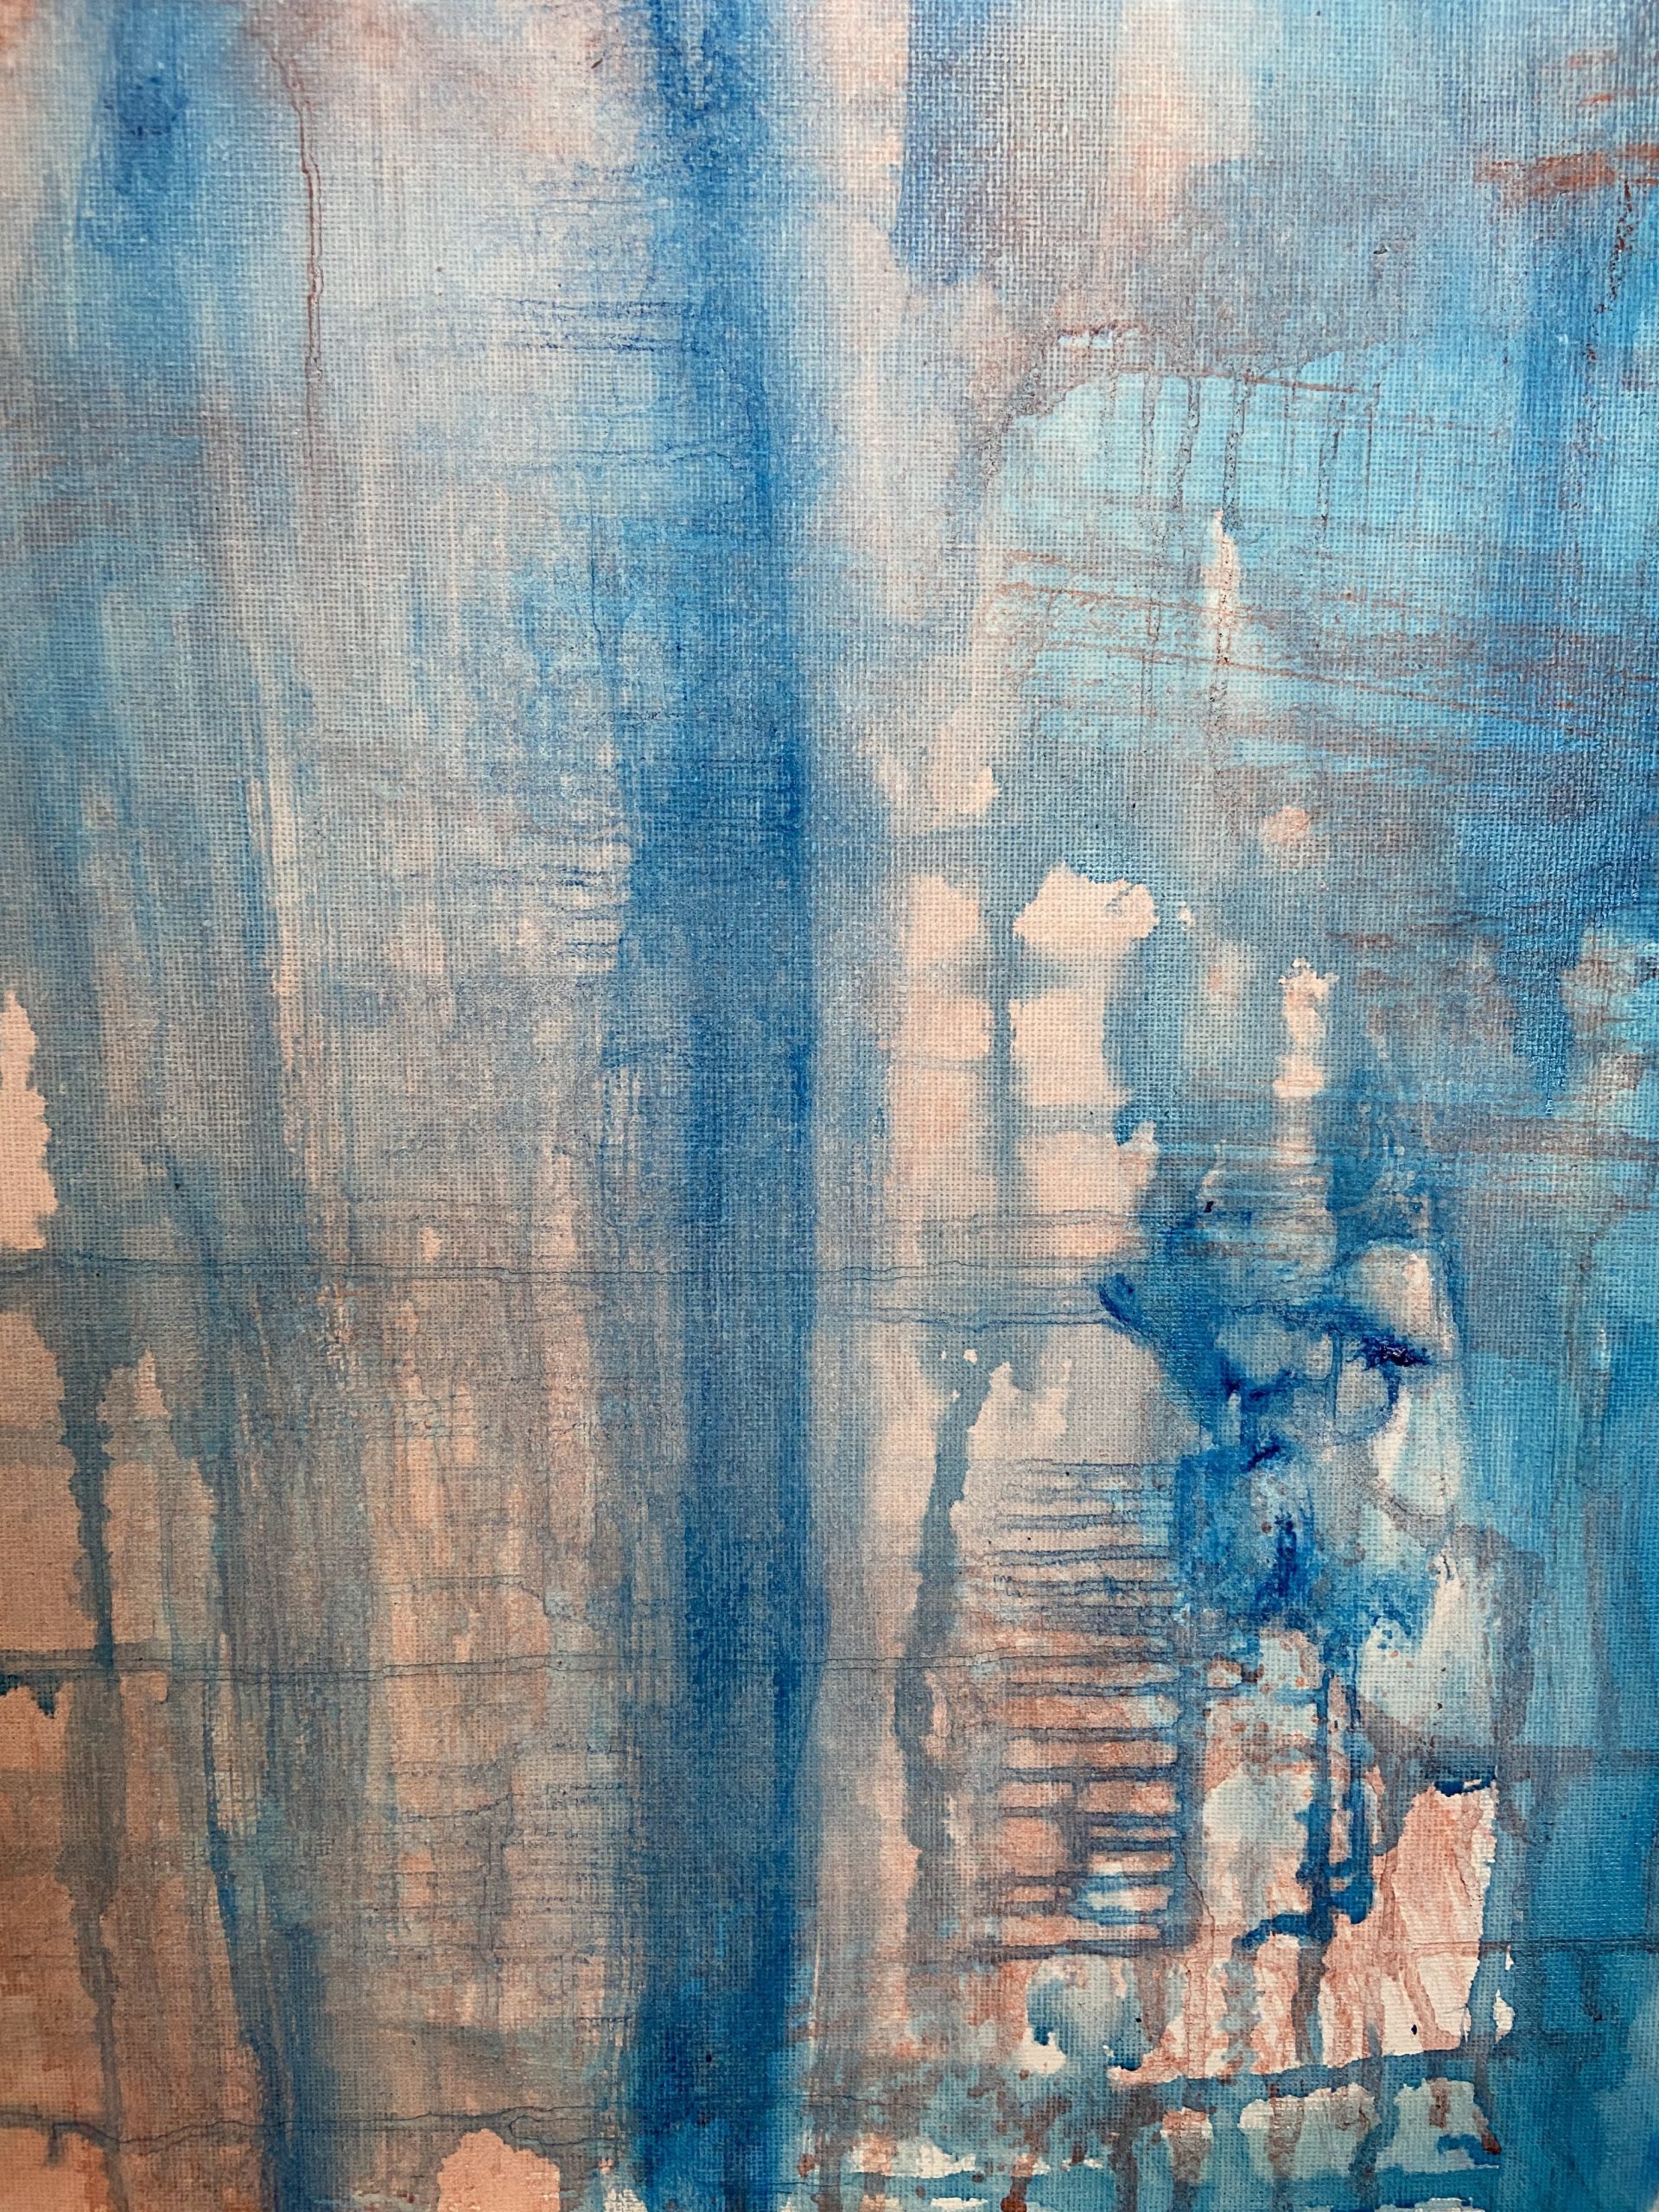 Bakground painting with paint drips